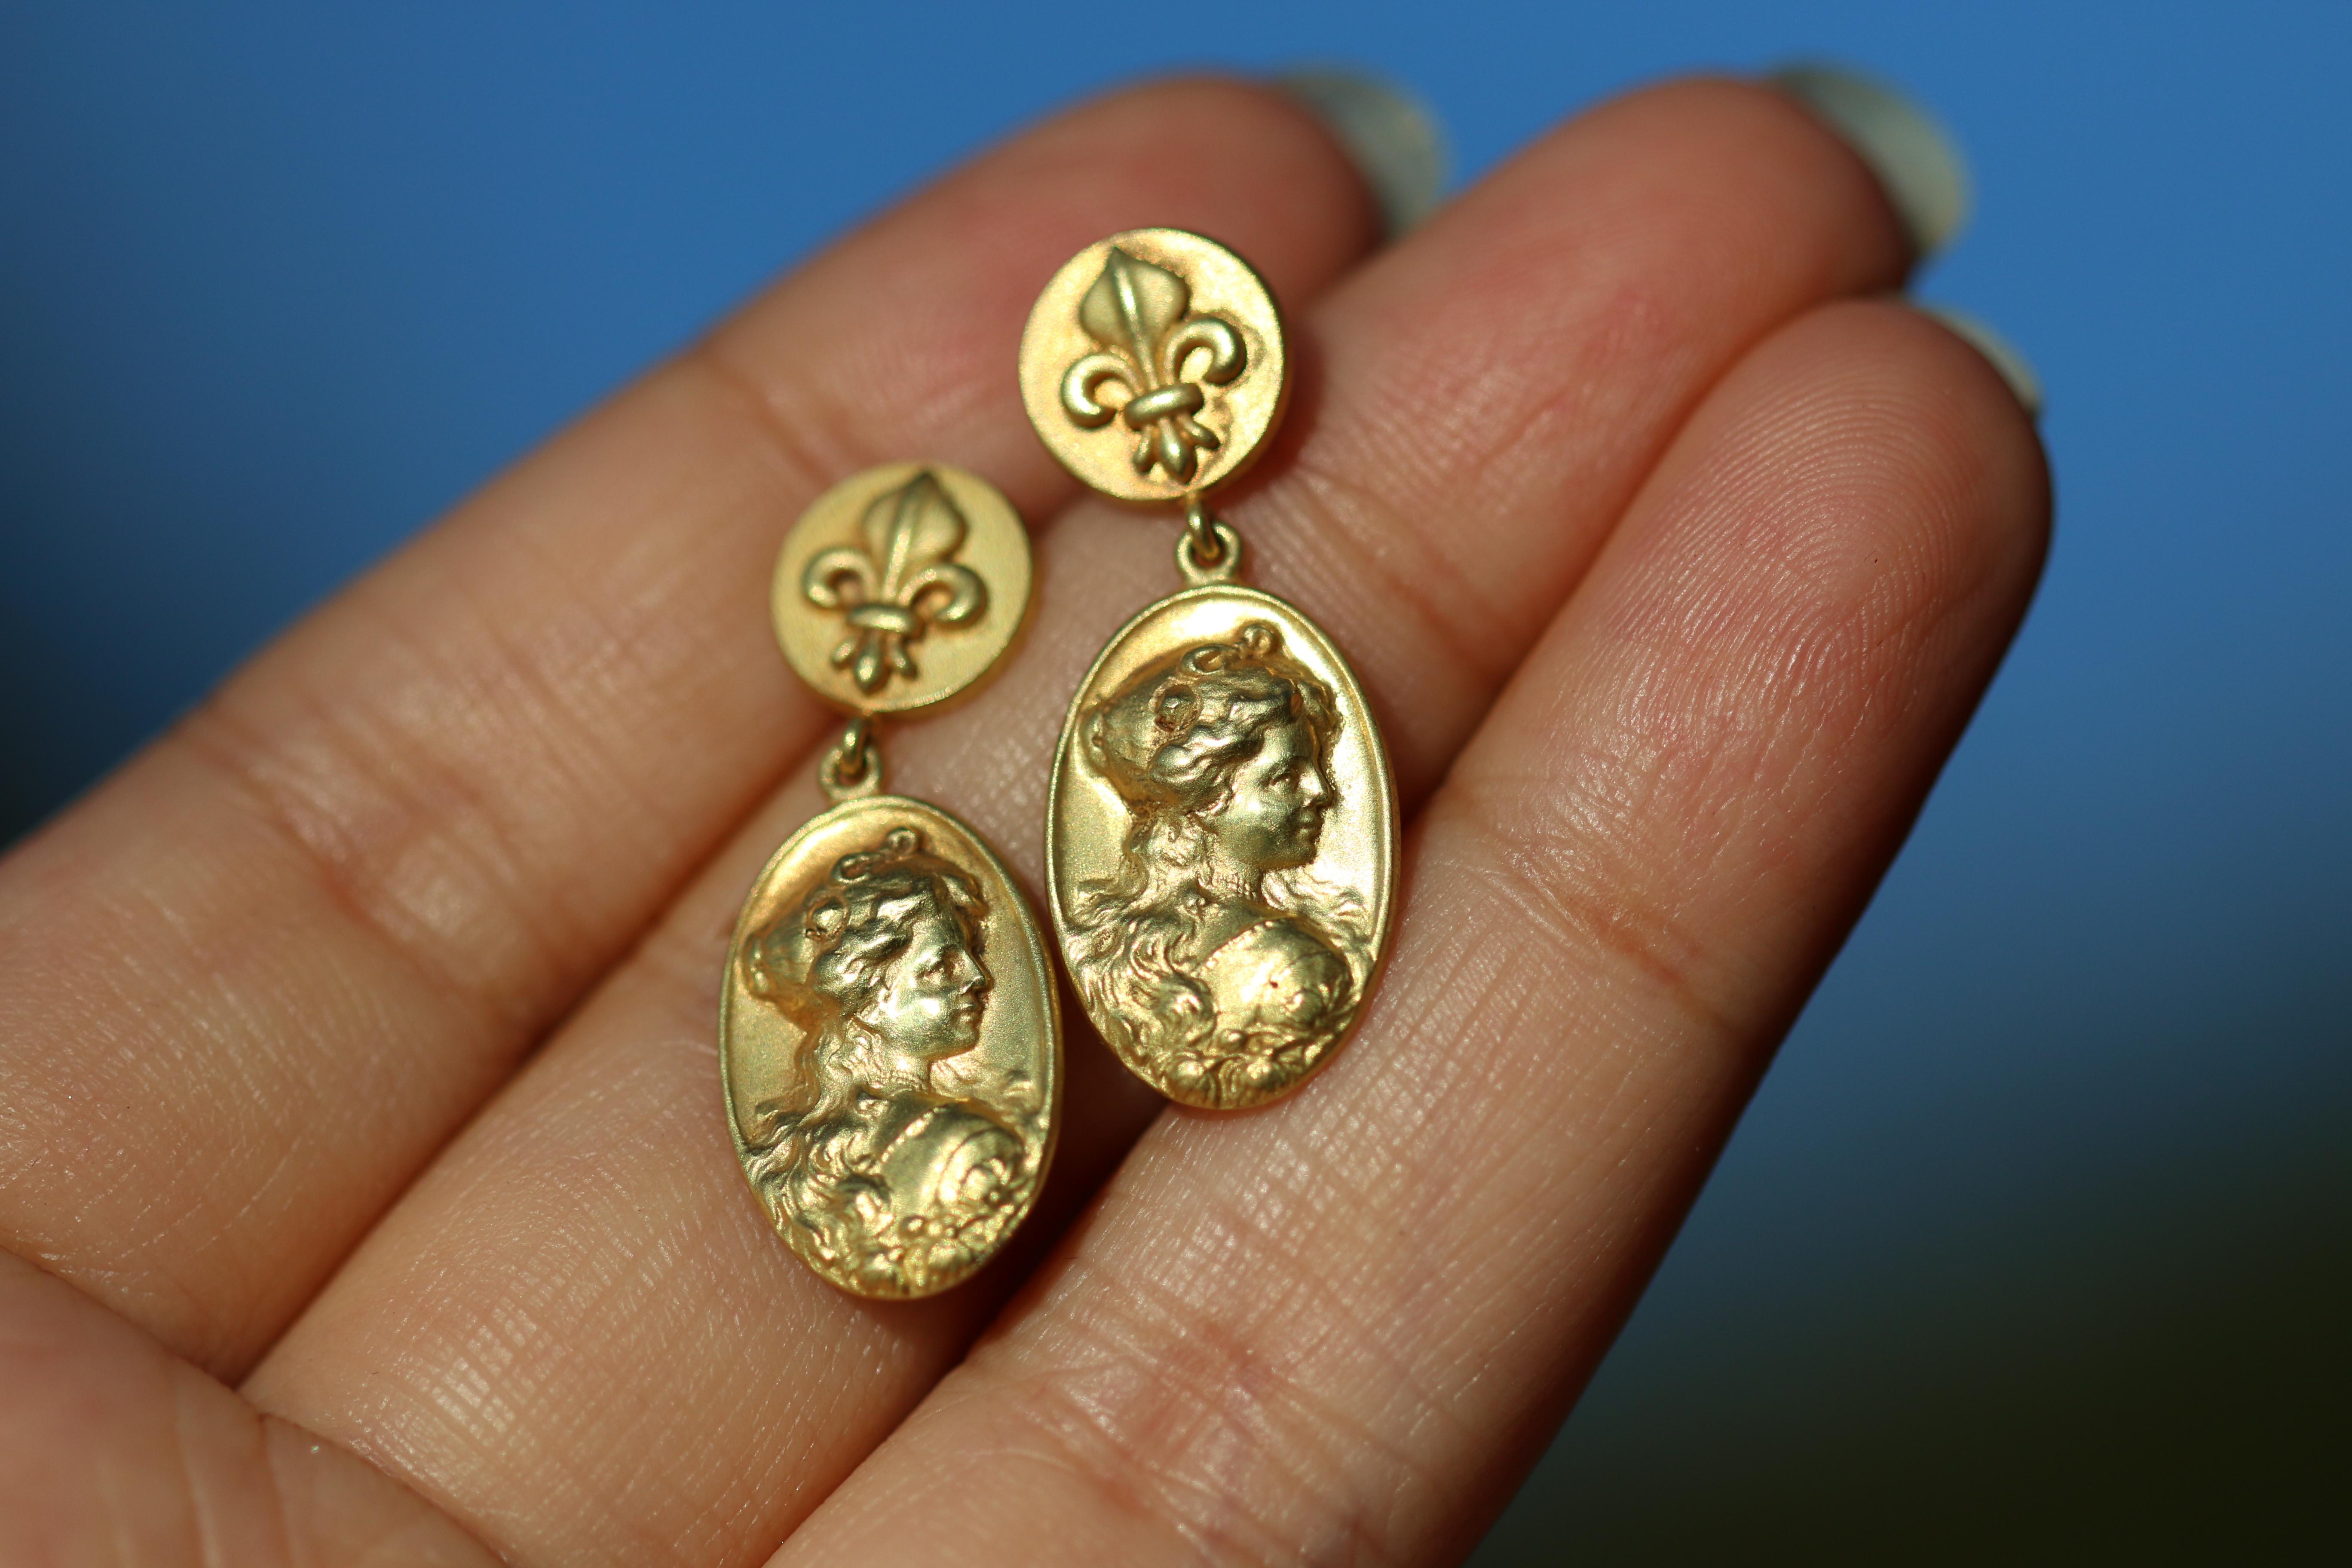 Weight: 7.8g
Length: 3cm
Width: 1.2cm
_________________________________________
Condition Excellent
Comes with Dandelion Antiques Presentation Box _________________________________________
Art Nouveau was such a stylish era, these earrings have been